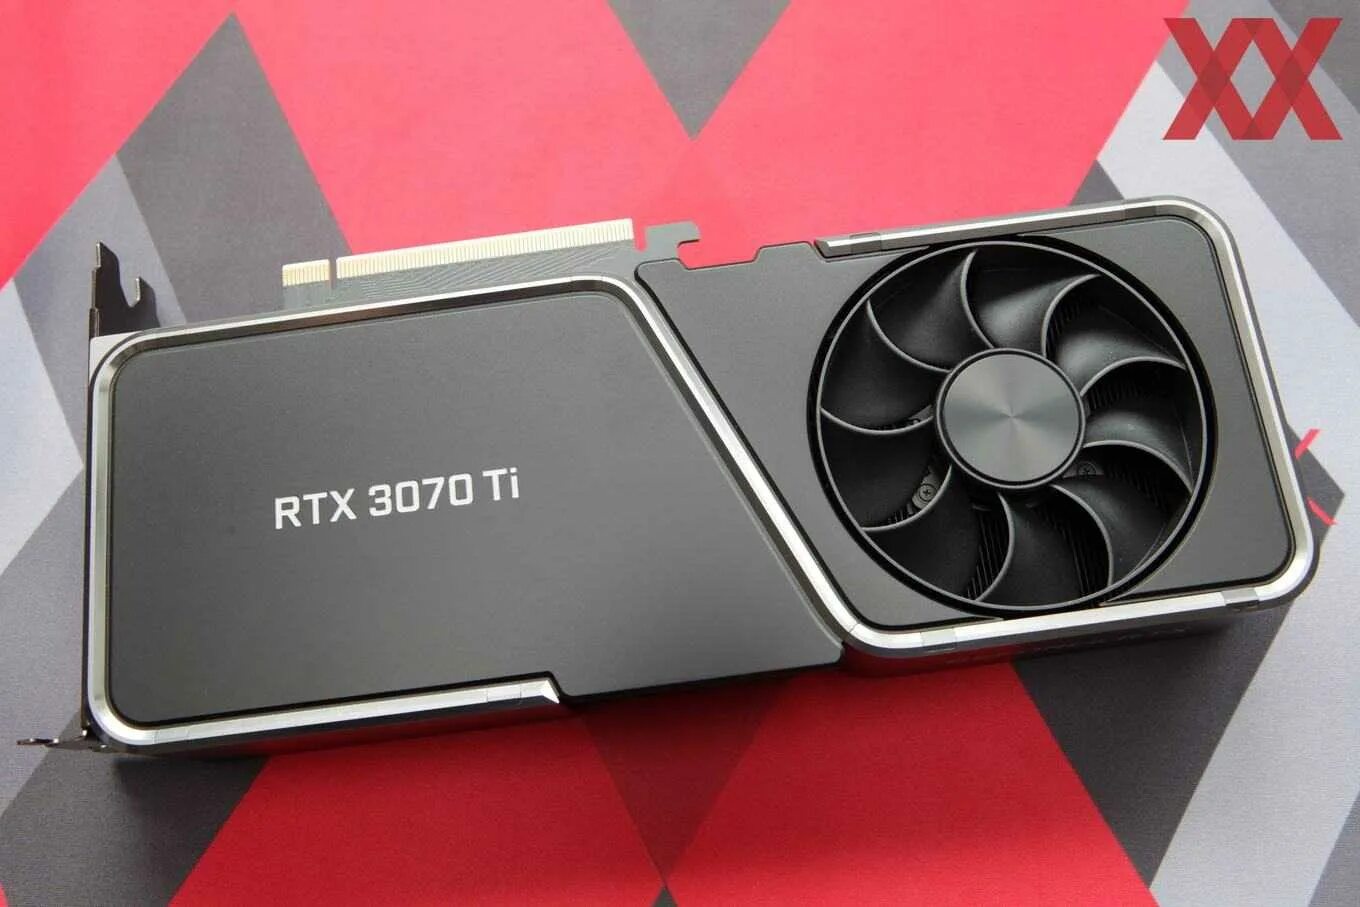 3070 founders edition. RTX 3070 ti founders. Видеокарта RTX 3070 ti founders Edition. RTX 3070 ti 12gb. RTX 3070 ti.